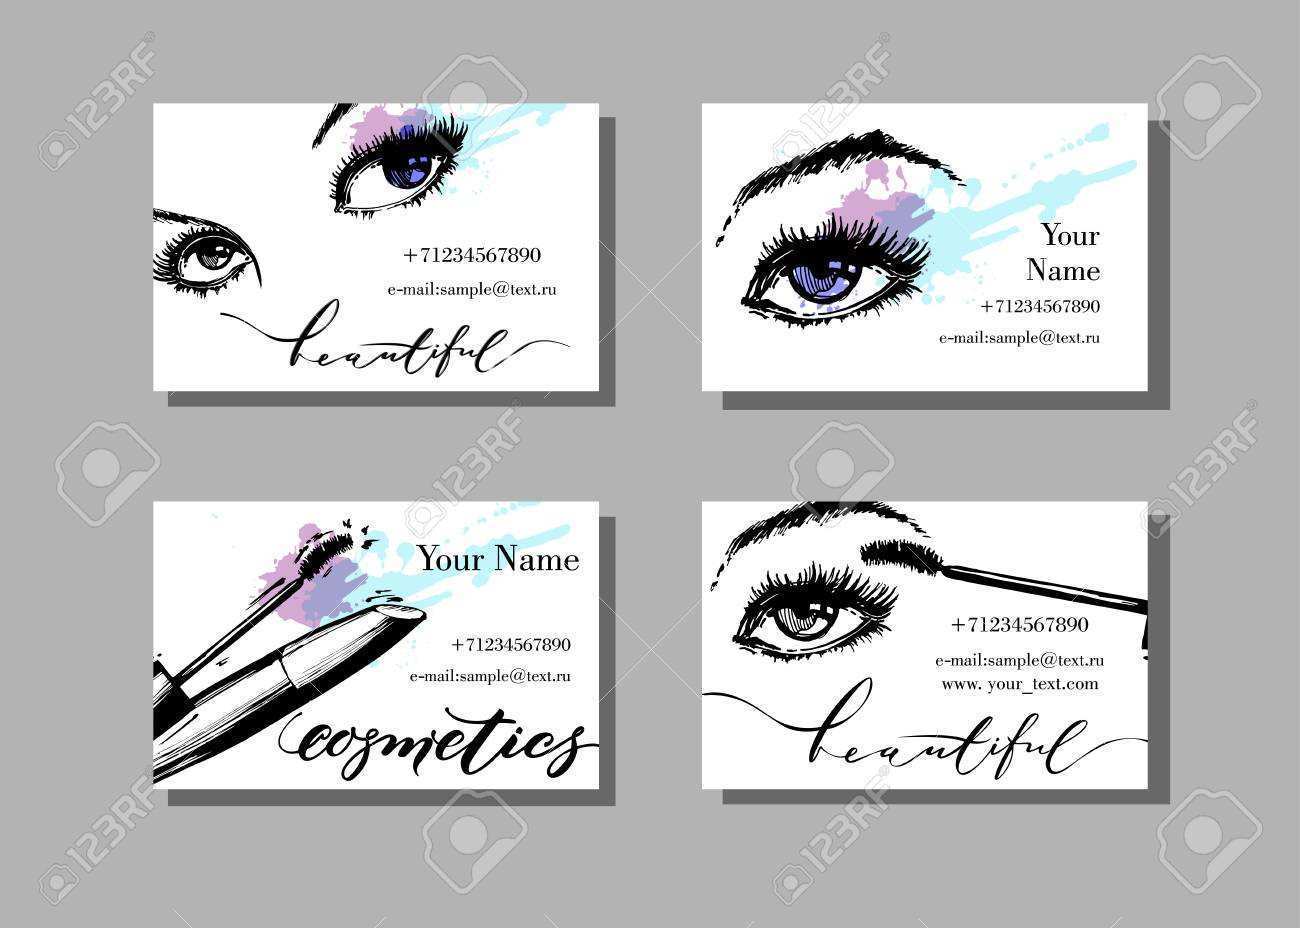 57 How To Create Business Card Template Eye in Word by Business Card Template Eye